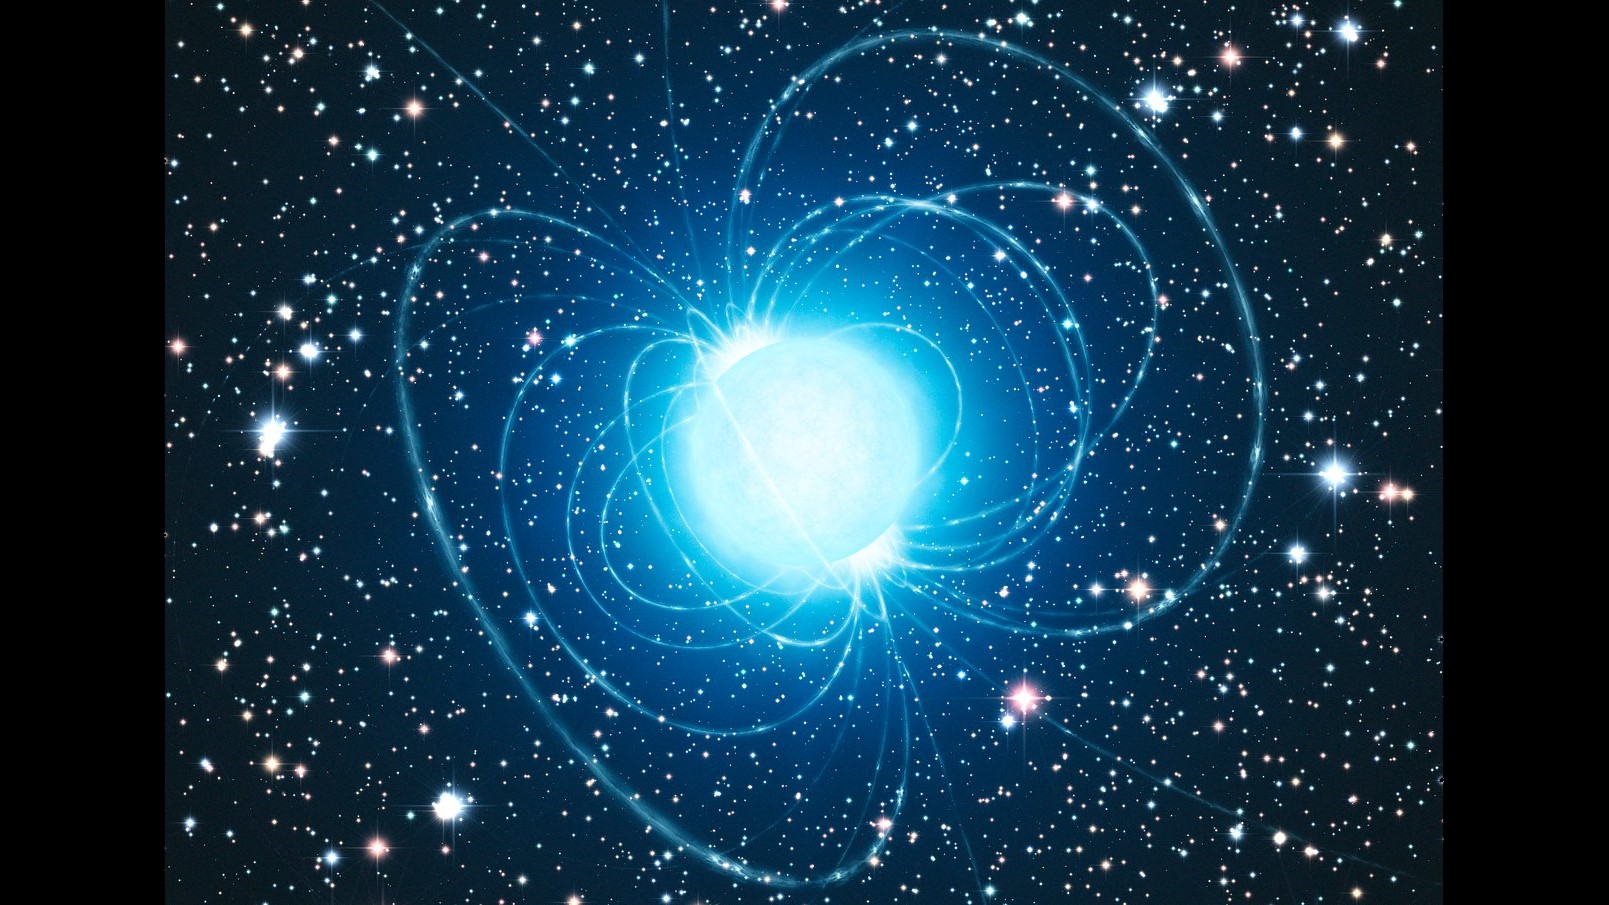 Superdense neutron star likely has solid crust, NASA telescope finds